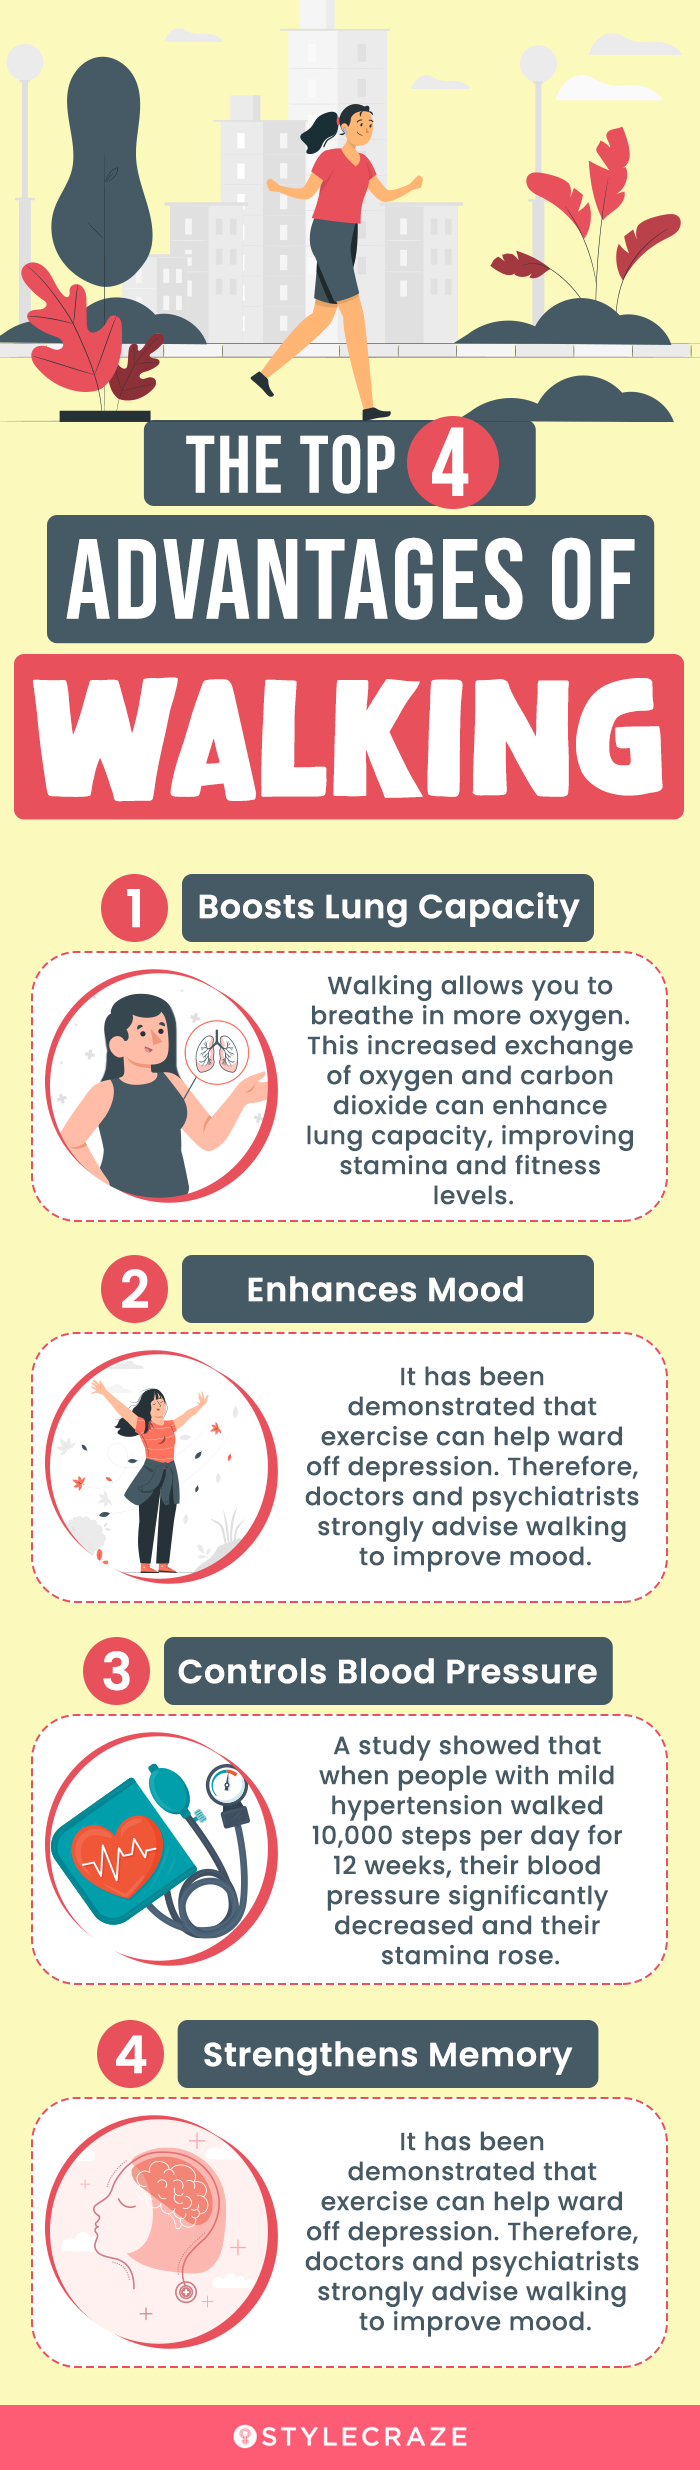 the top 4 advantages of walking (infographic)